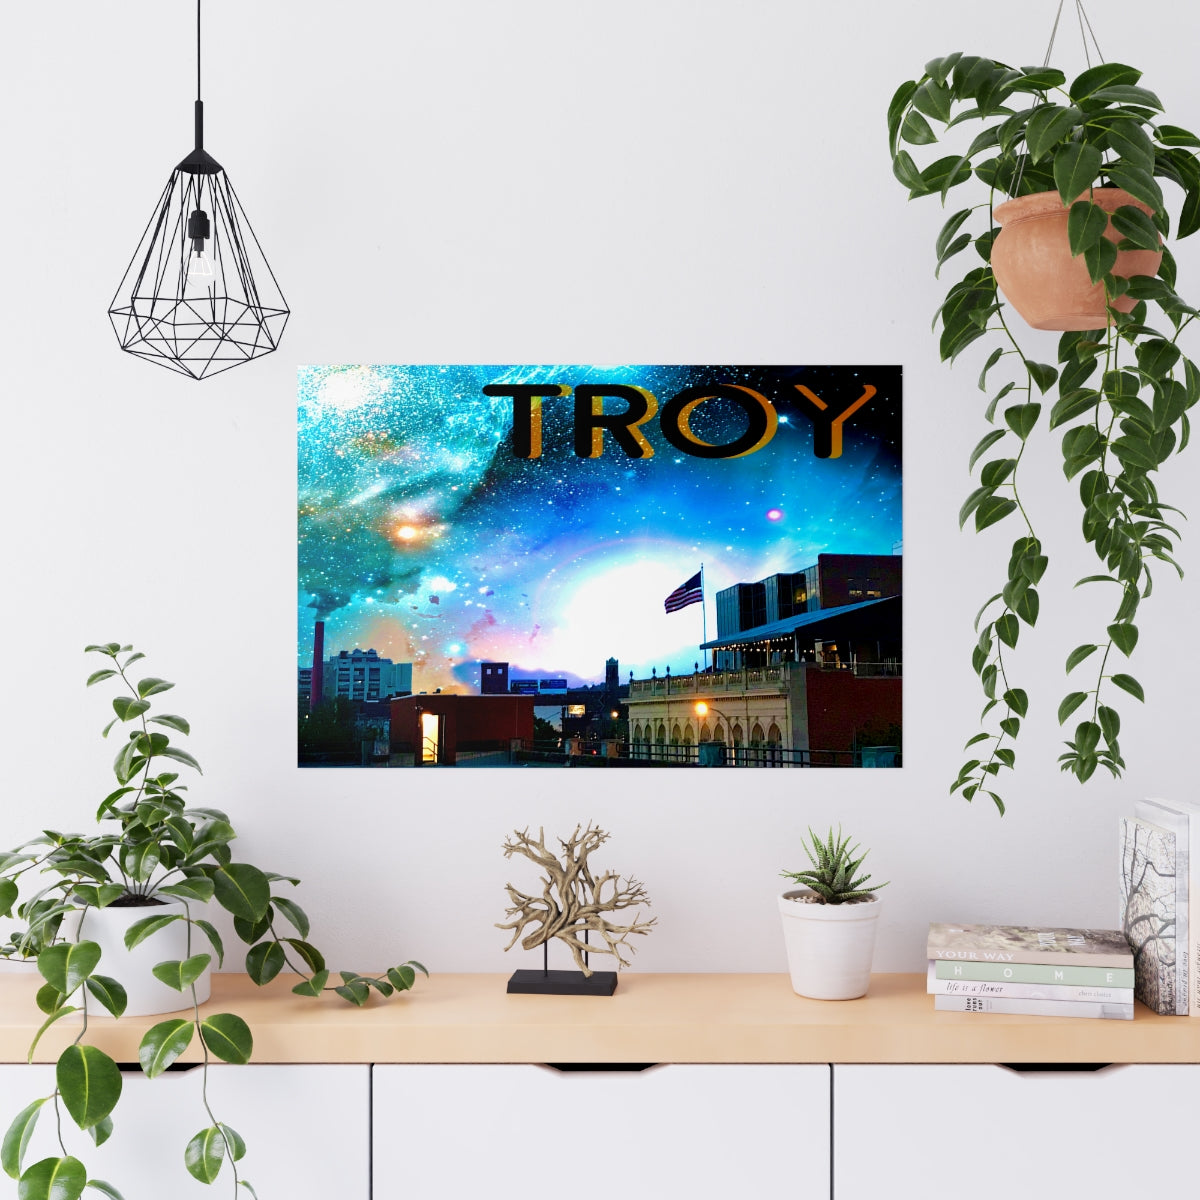 Troy Top of the Parking garage poster